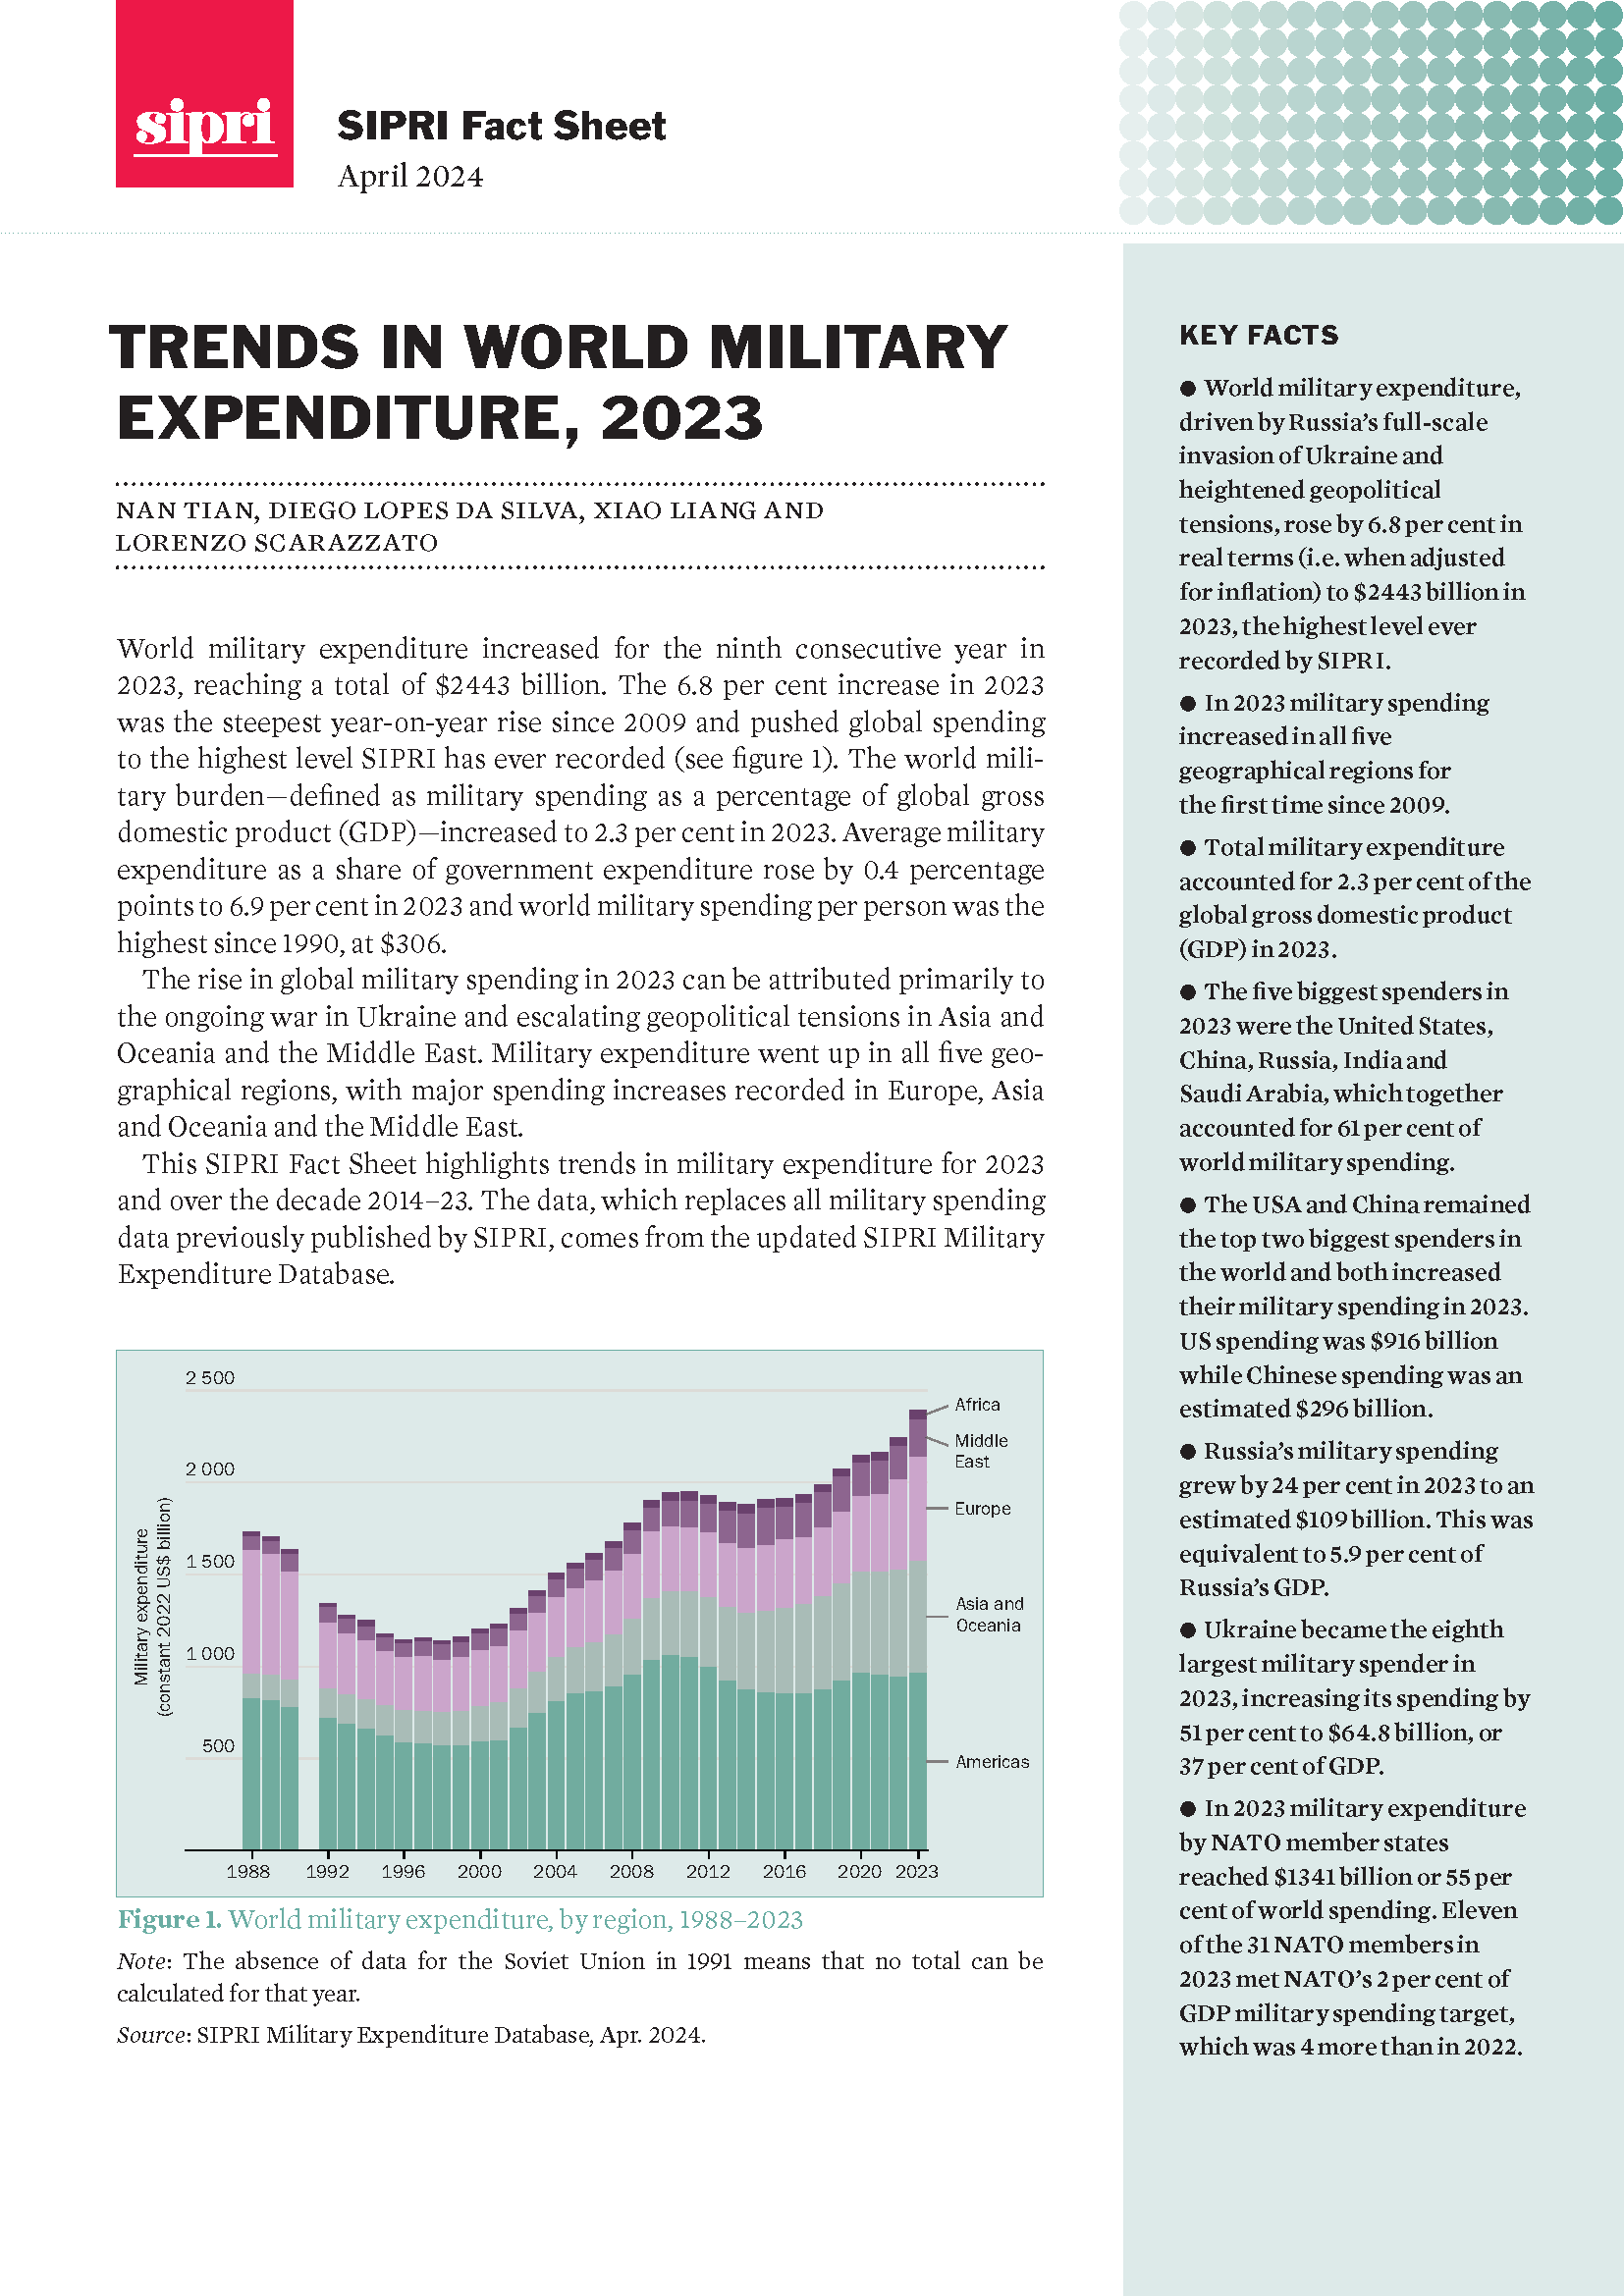 2023 World Military Expenditure Trends